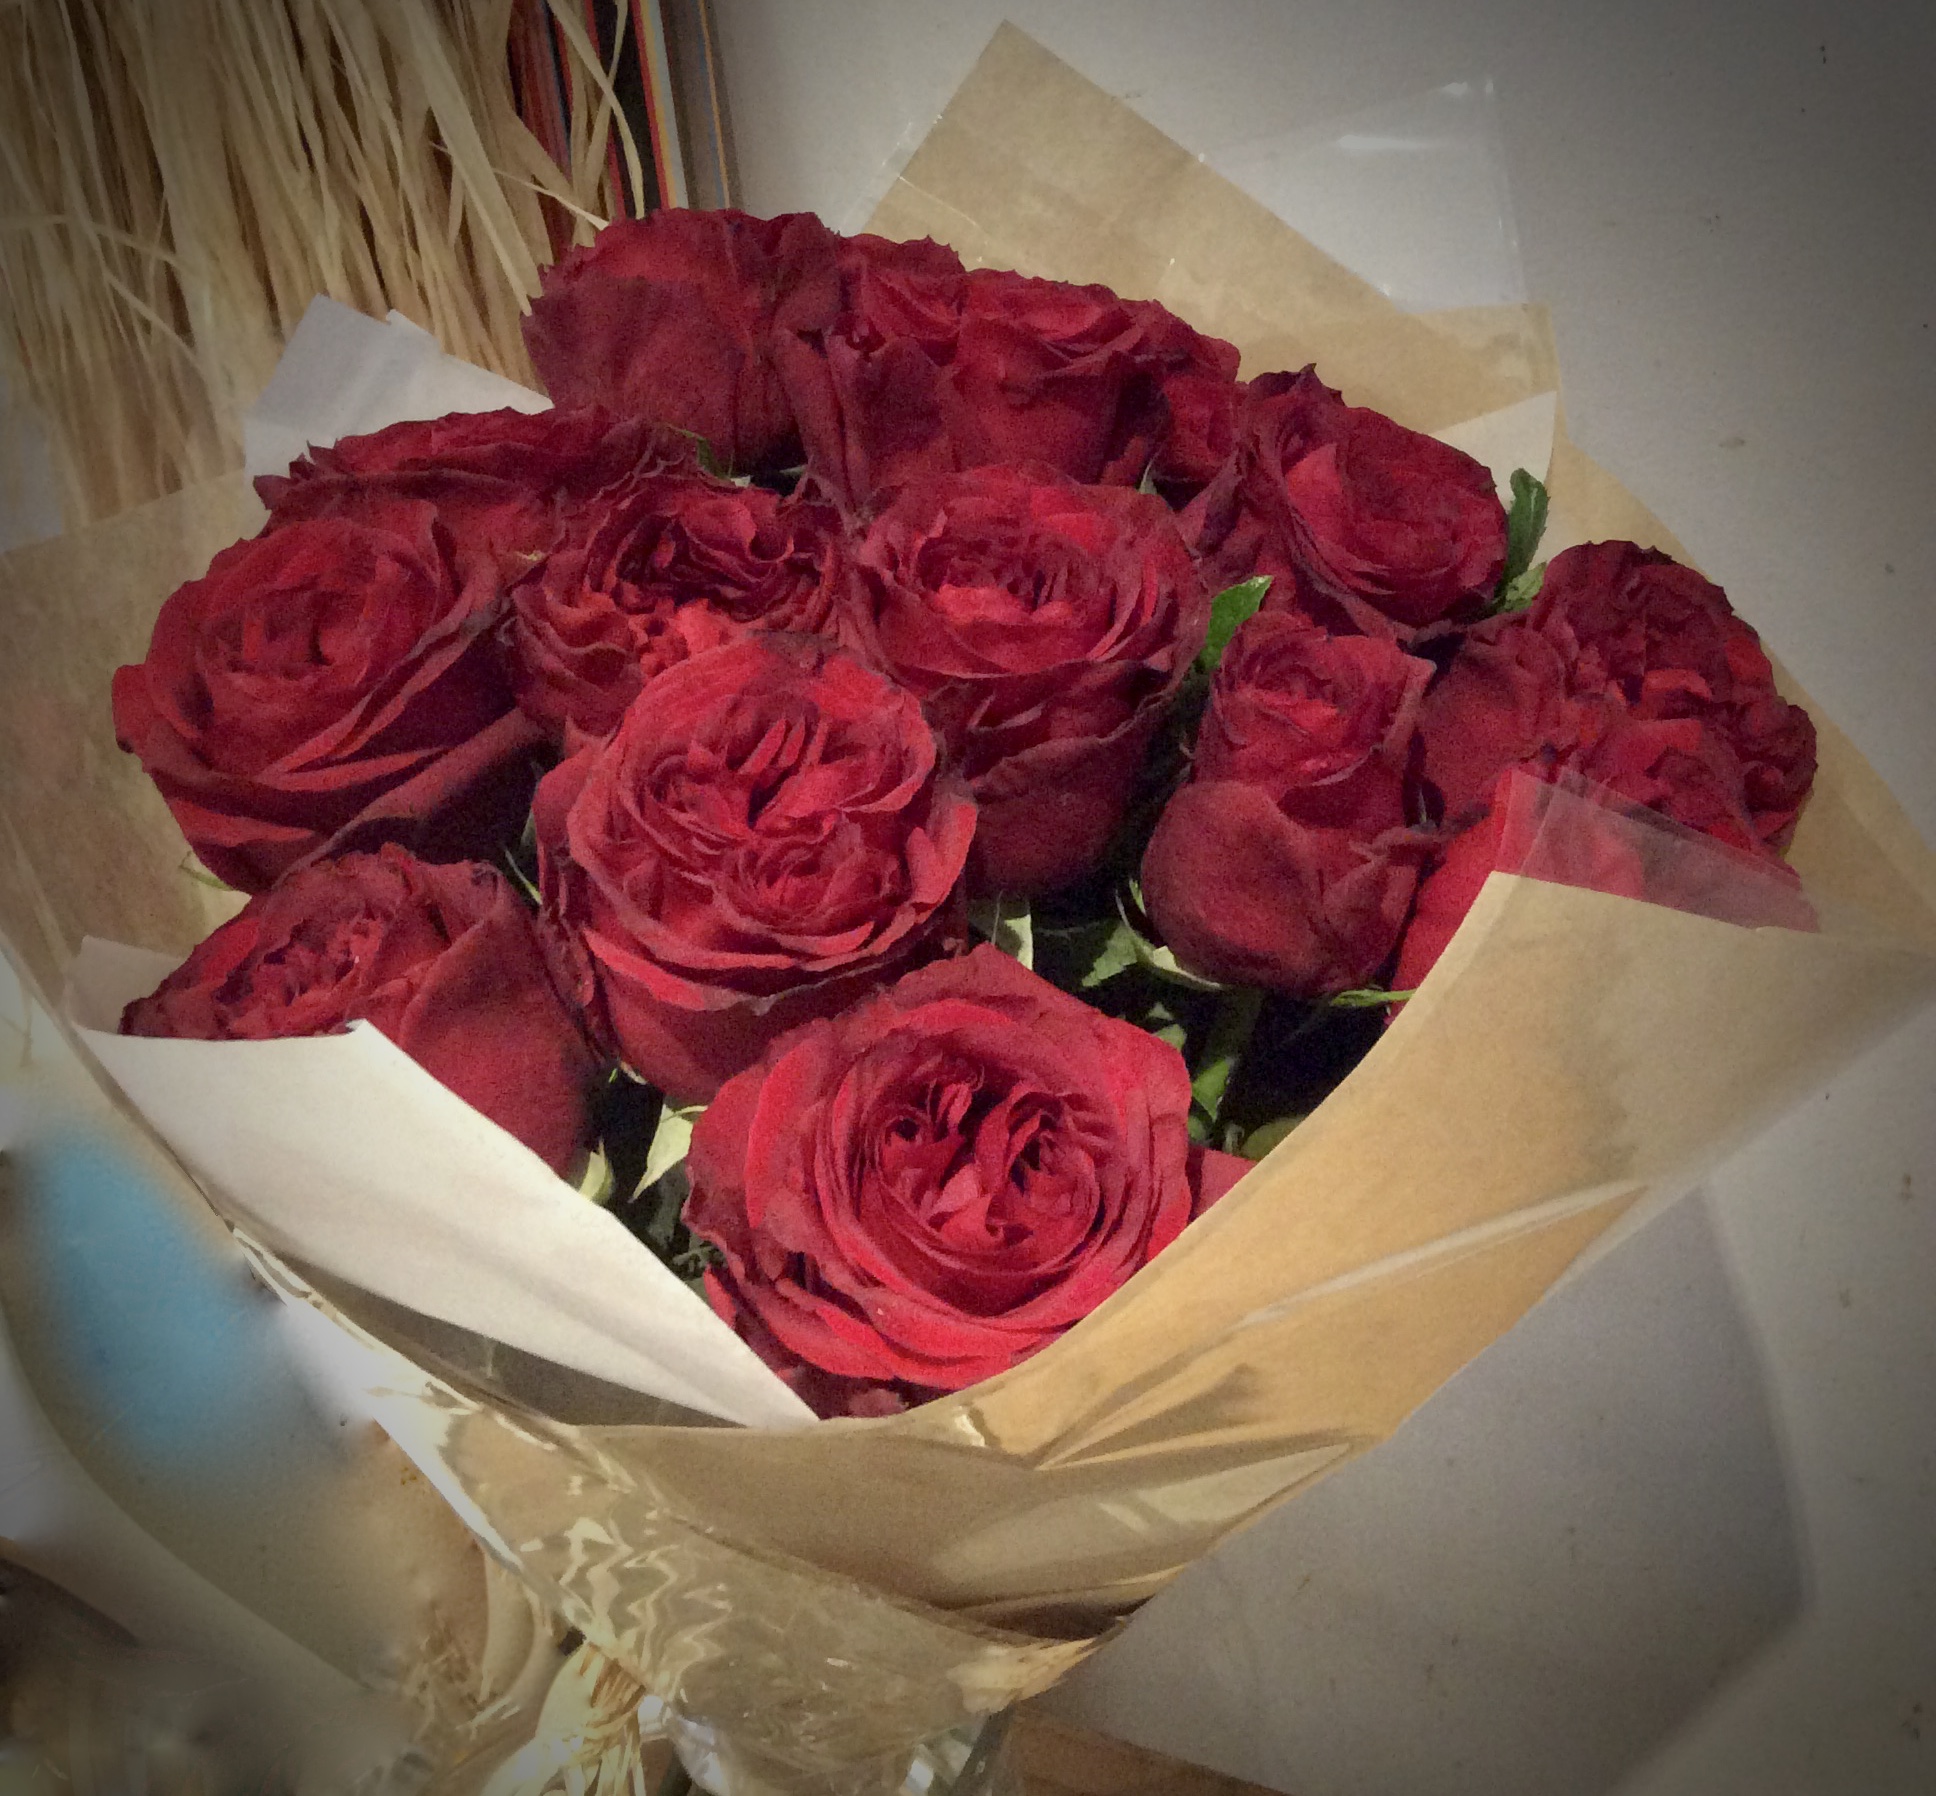 Valentine rose bouquets. for Port Elizabeth delivery or call and collect.